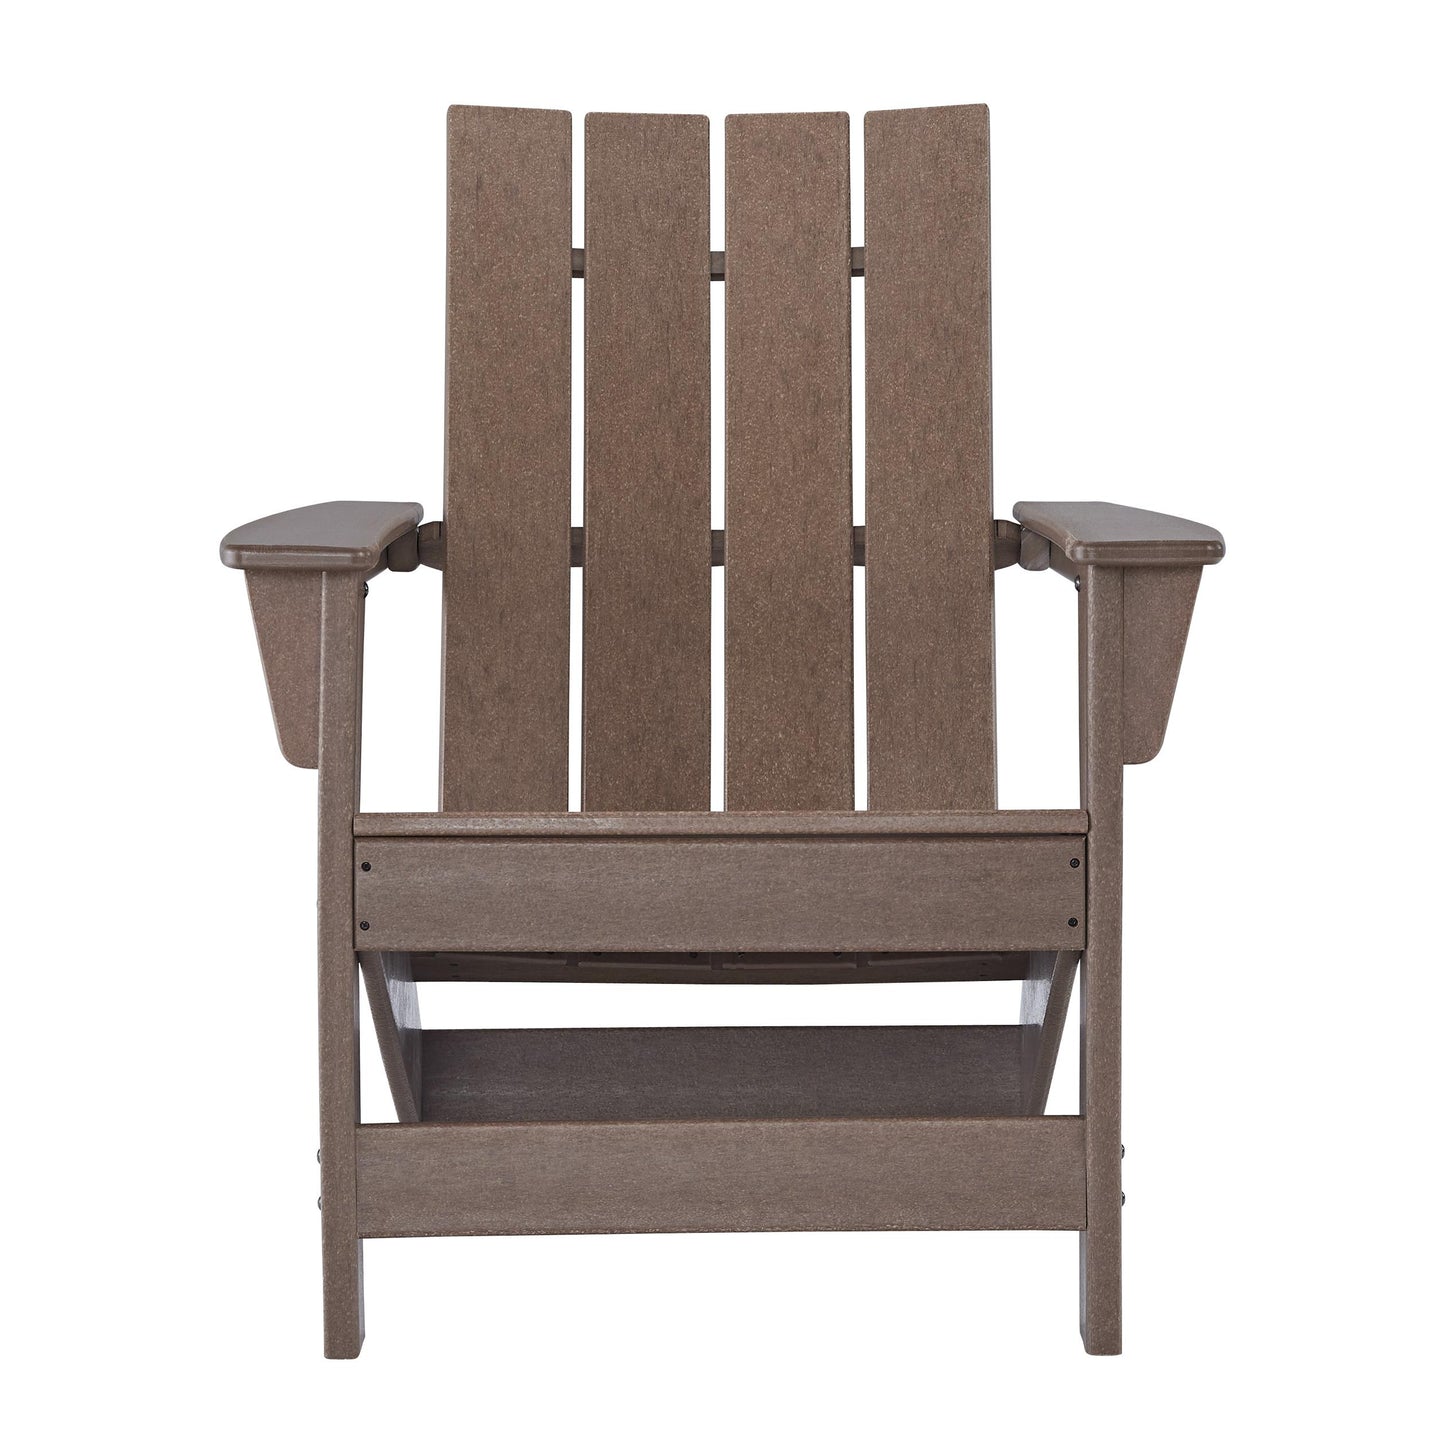 Signature Design by Ashley Outdoor Seating Adirondack Chairs P420-898 IMAGE 2